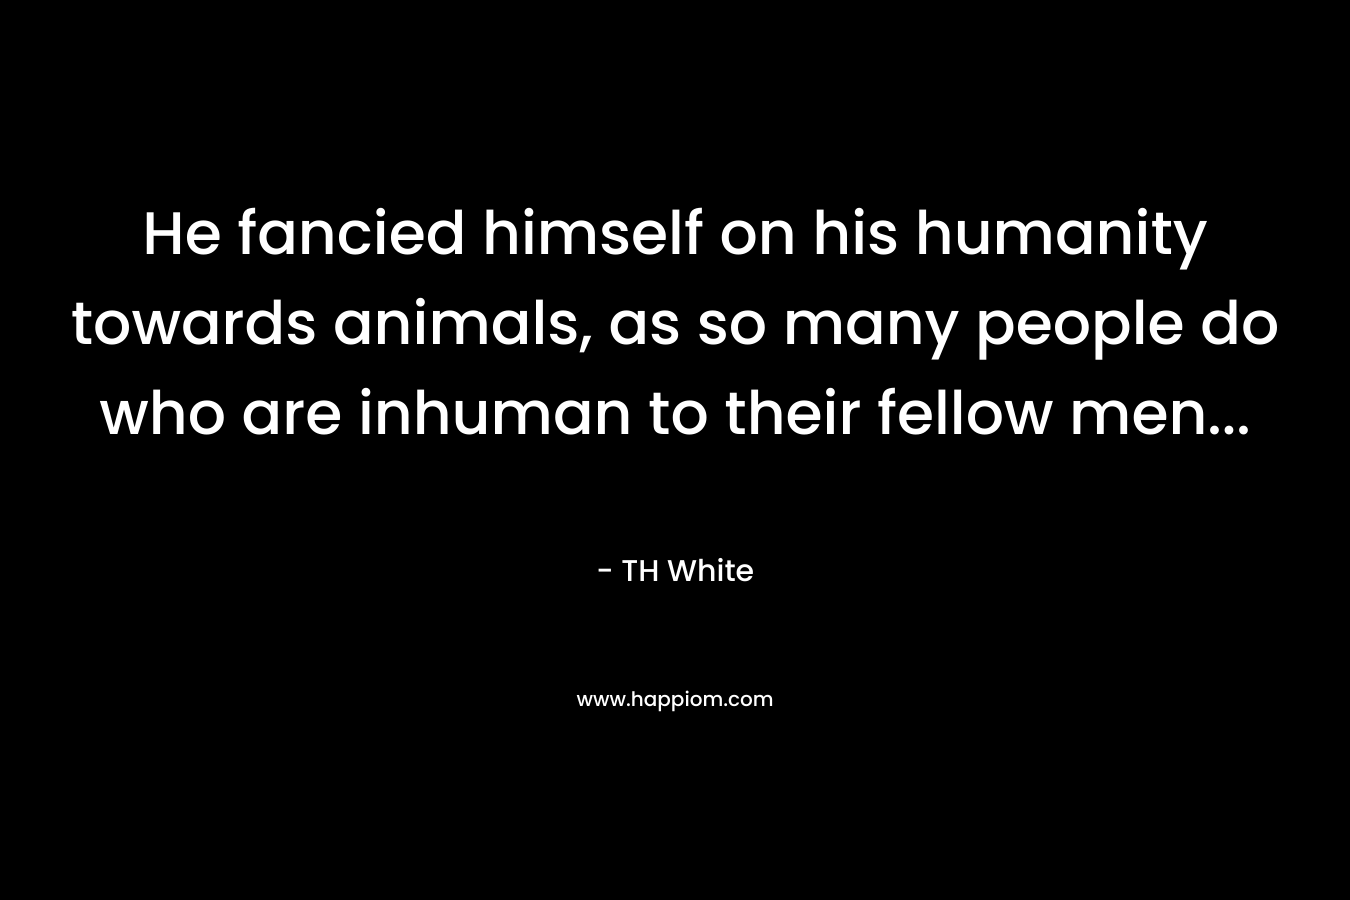 He fancied himself on his humanity towards animals, as so many people do who are inhuman to their fellow men...